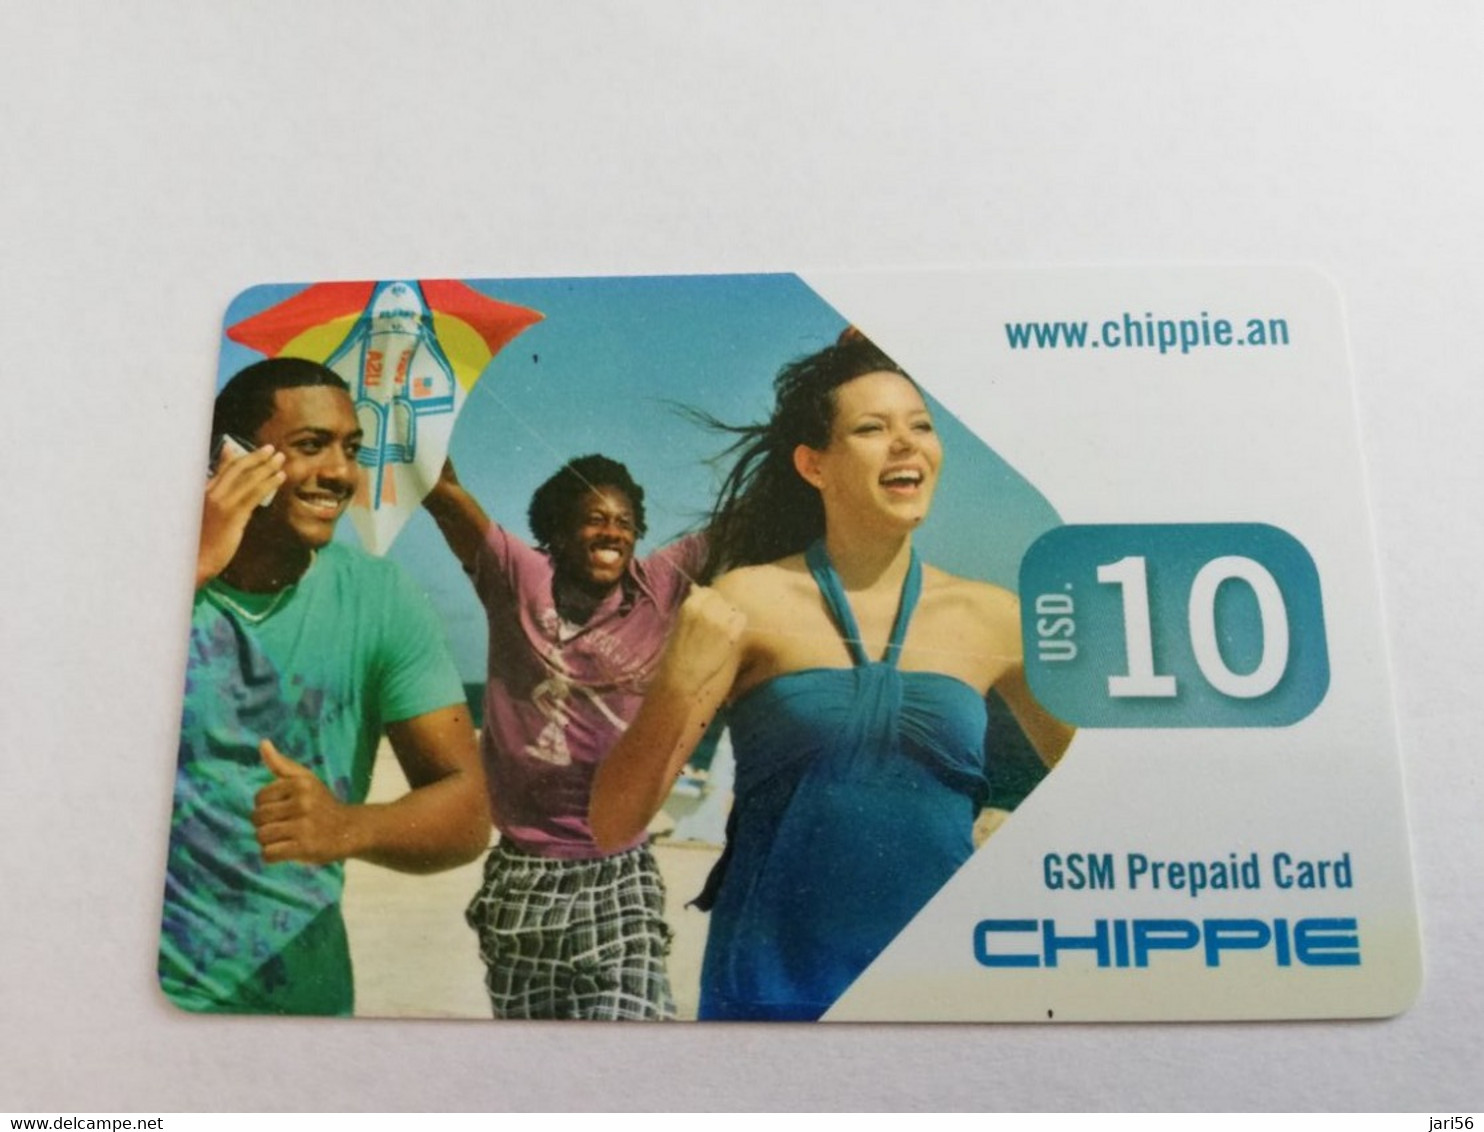 CURACAO PREPAIDS $ 10- 3 PEOPLE ON PHONE  31-12-2015    VERY FINE USED CARD        ** 5299AA** - Antilles (Netherlands)